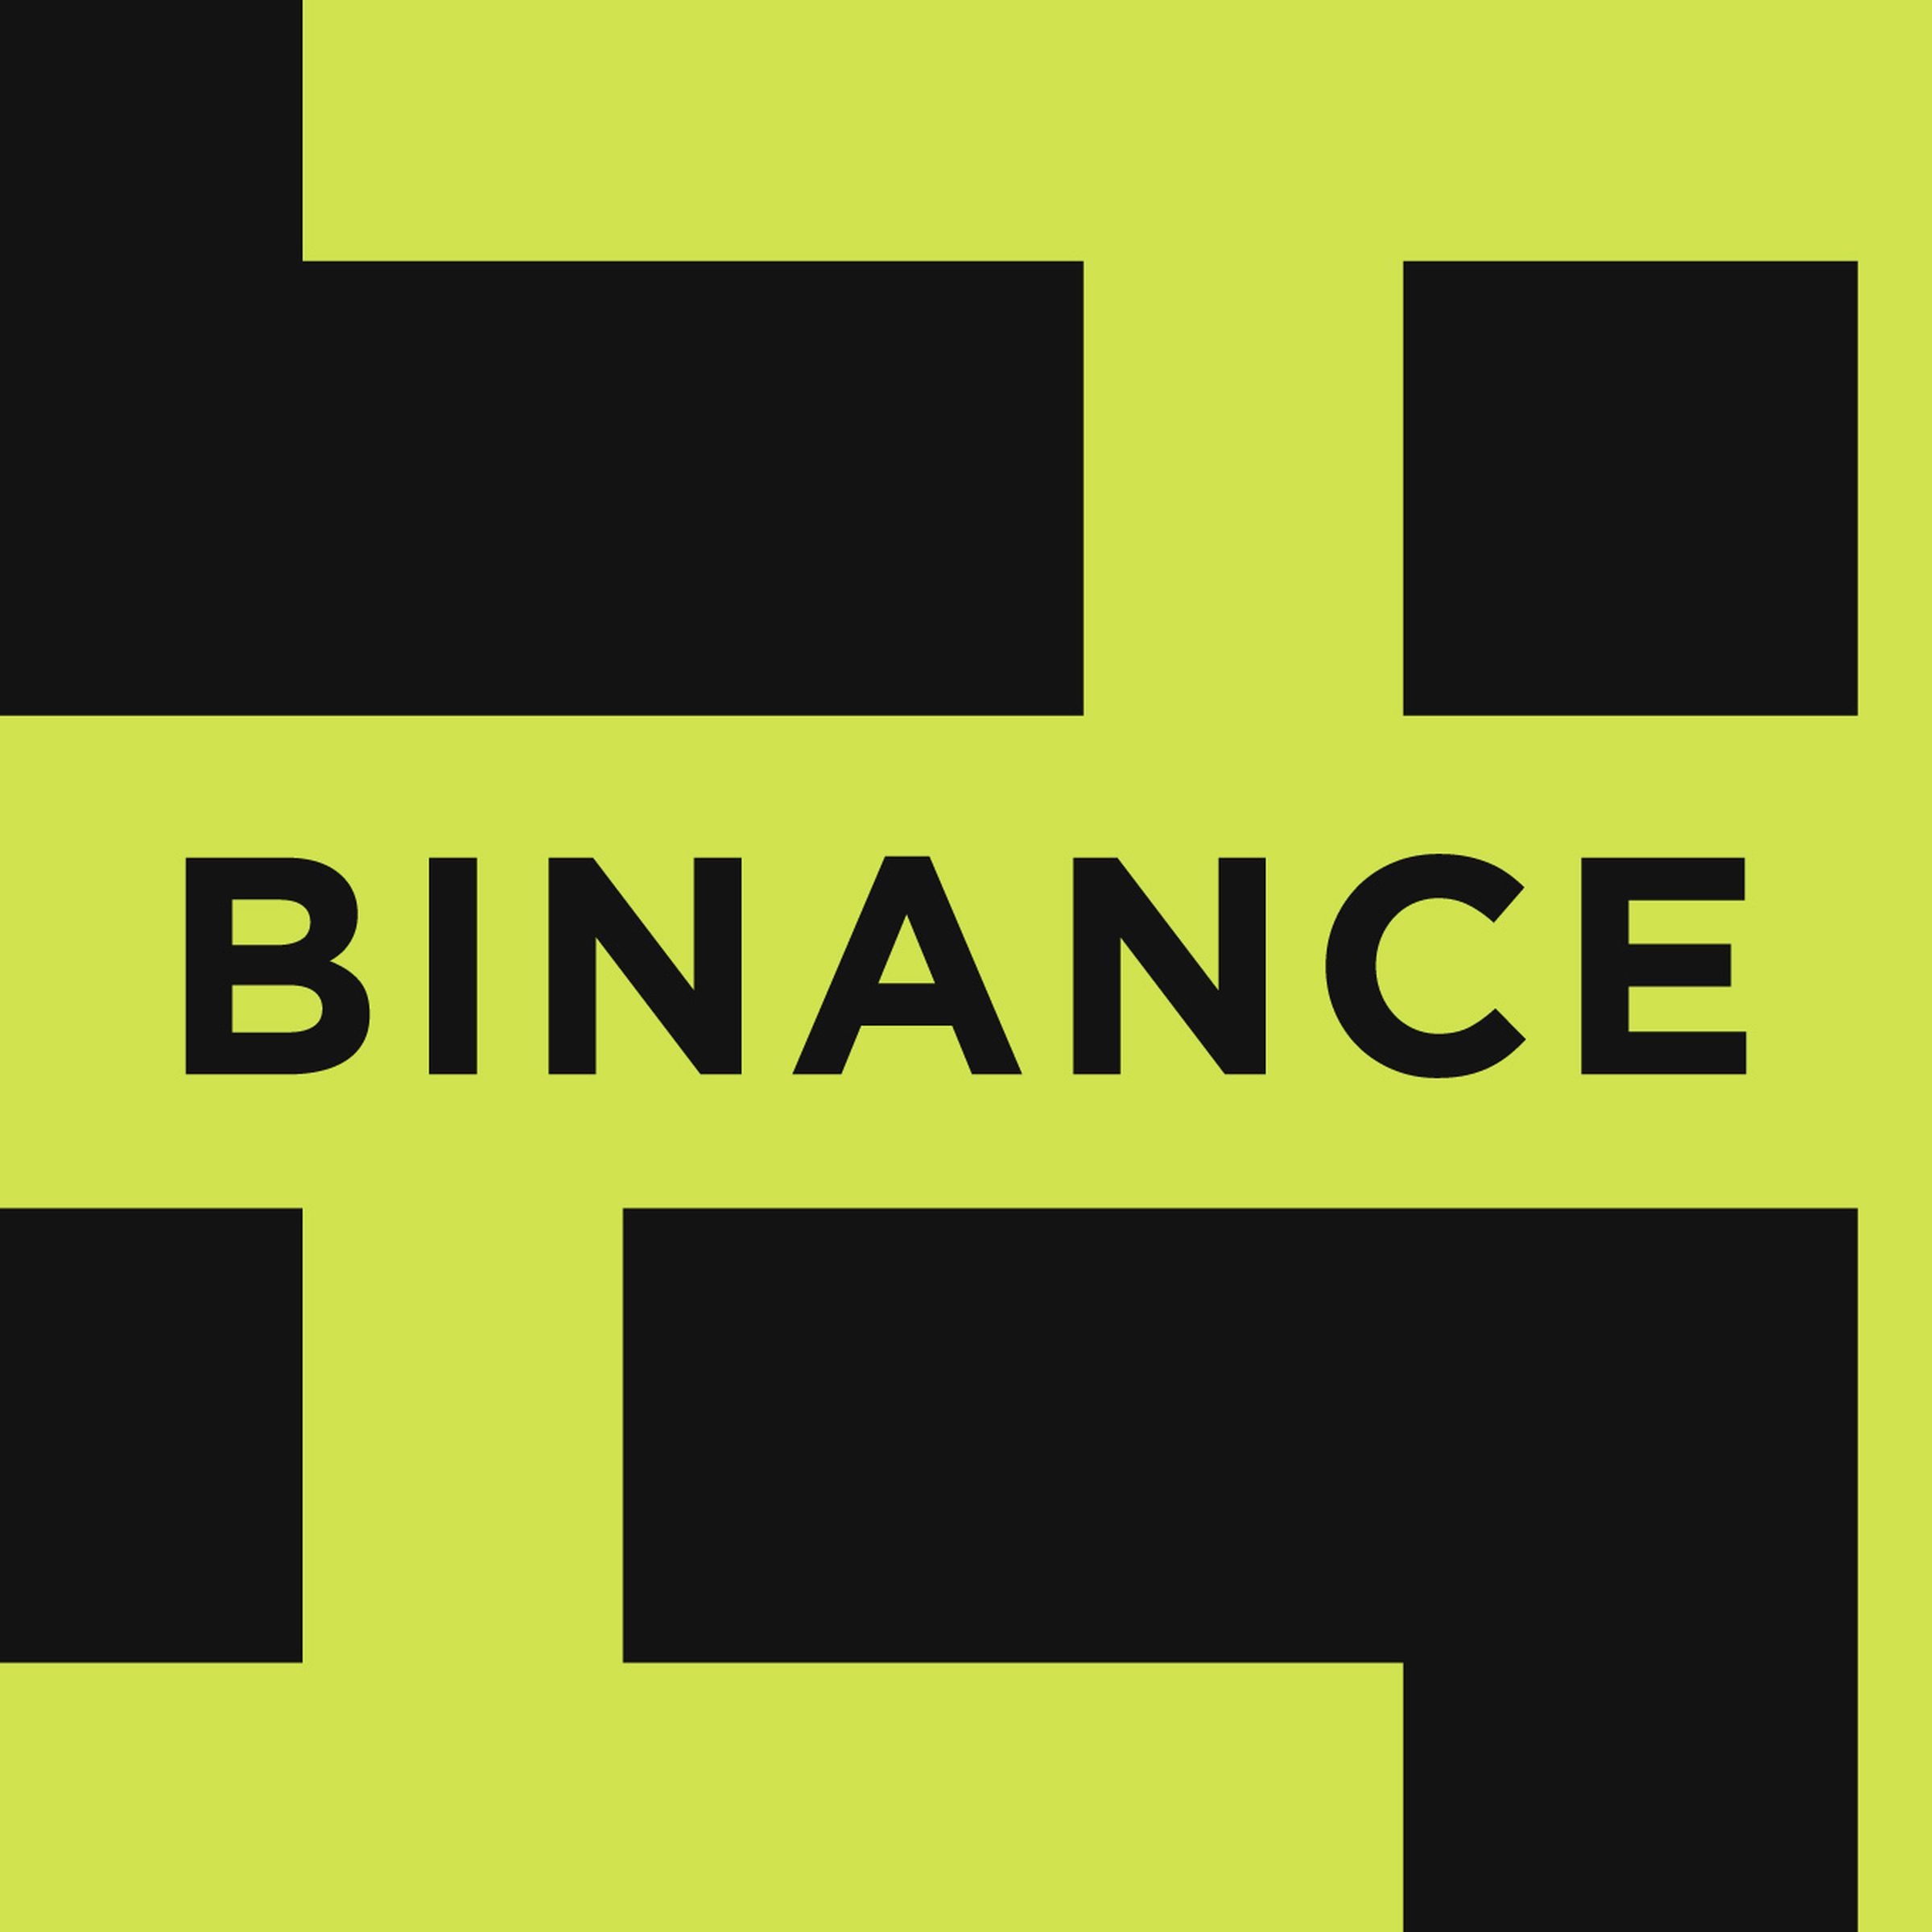 An image showing the Binance logo on a black and green background